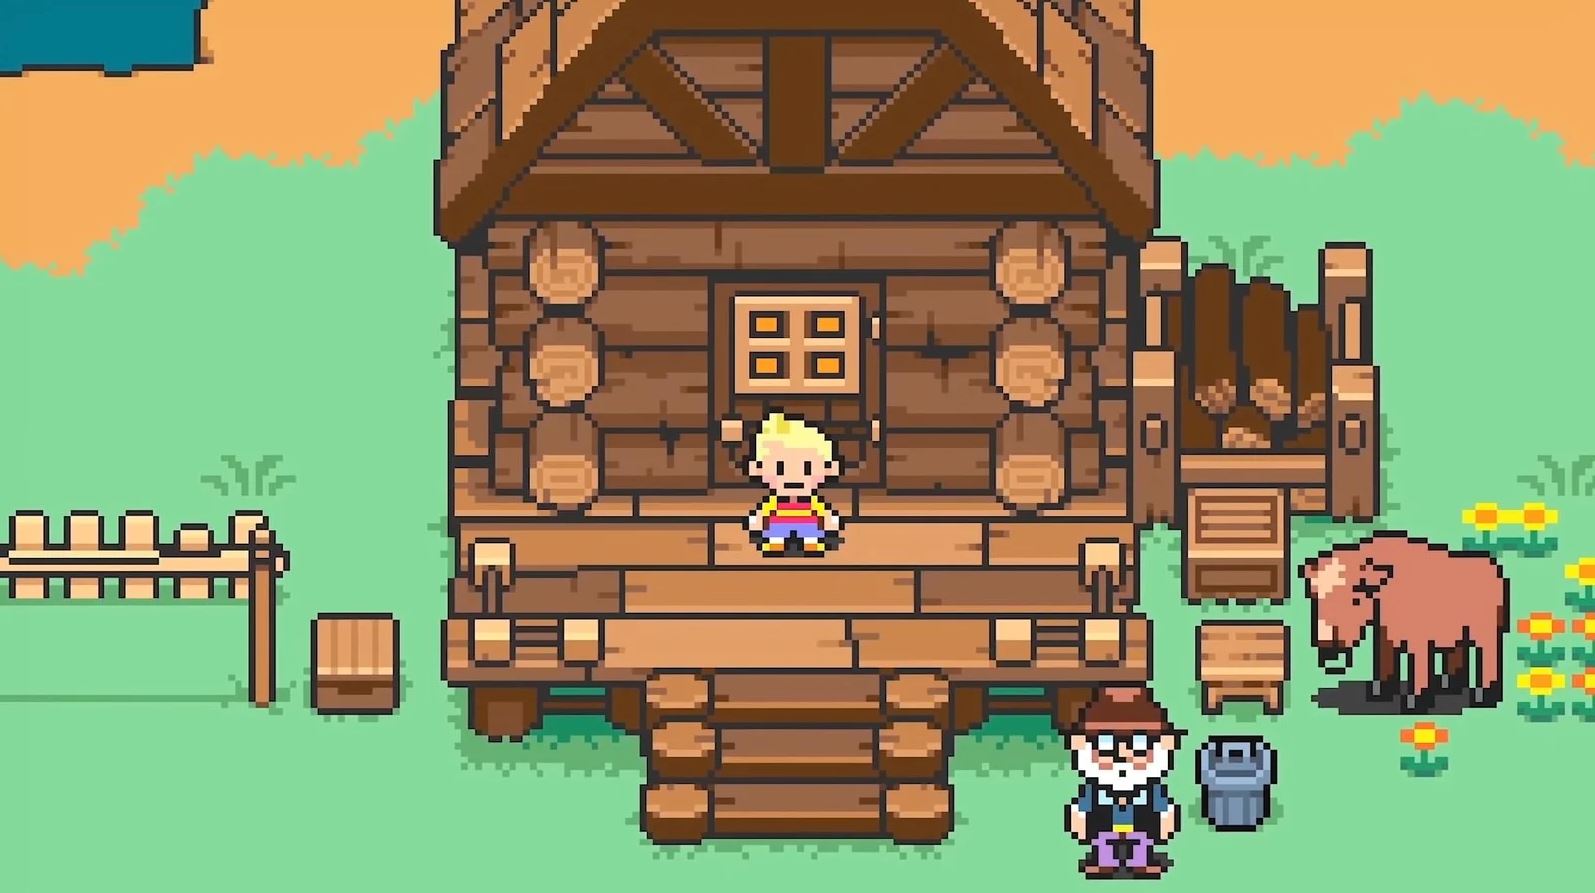 Mother 3 Hasn't Been Ported to the West Due to 